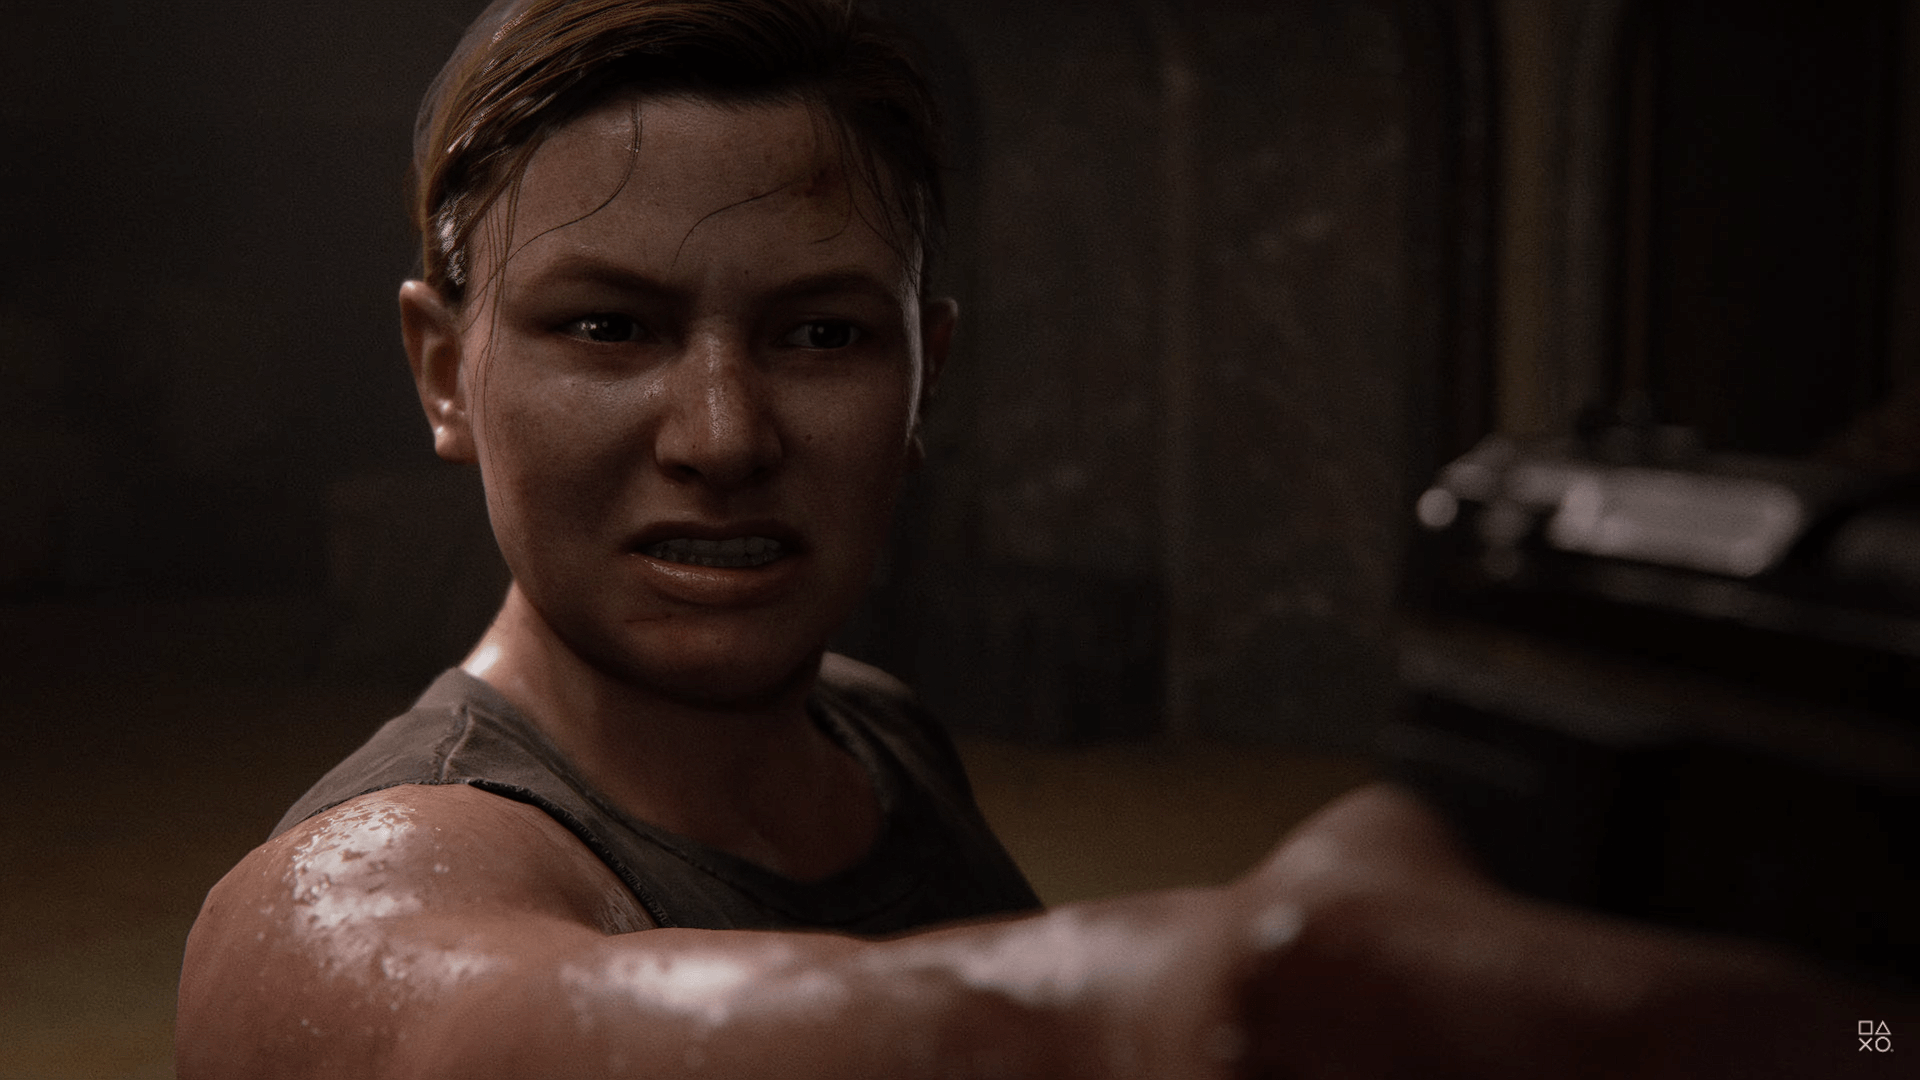 The Last Of Us Part II Wins Game Of The Year At The 2020 Game Awards